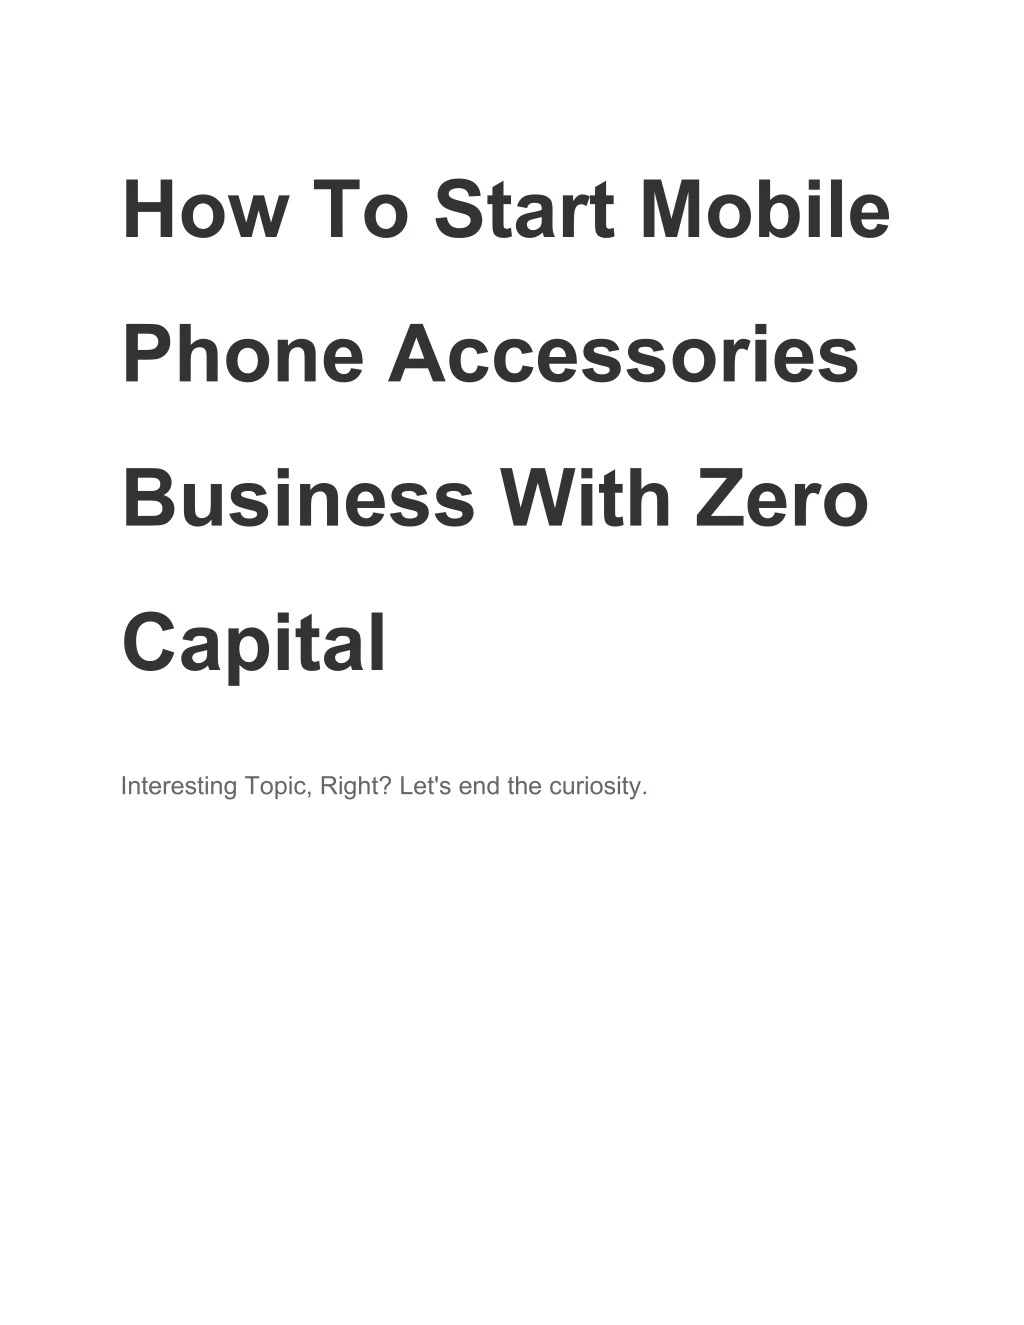 how to start mobile